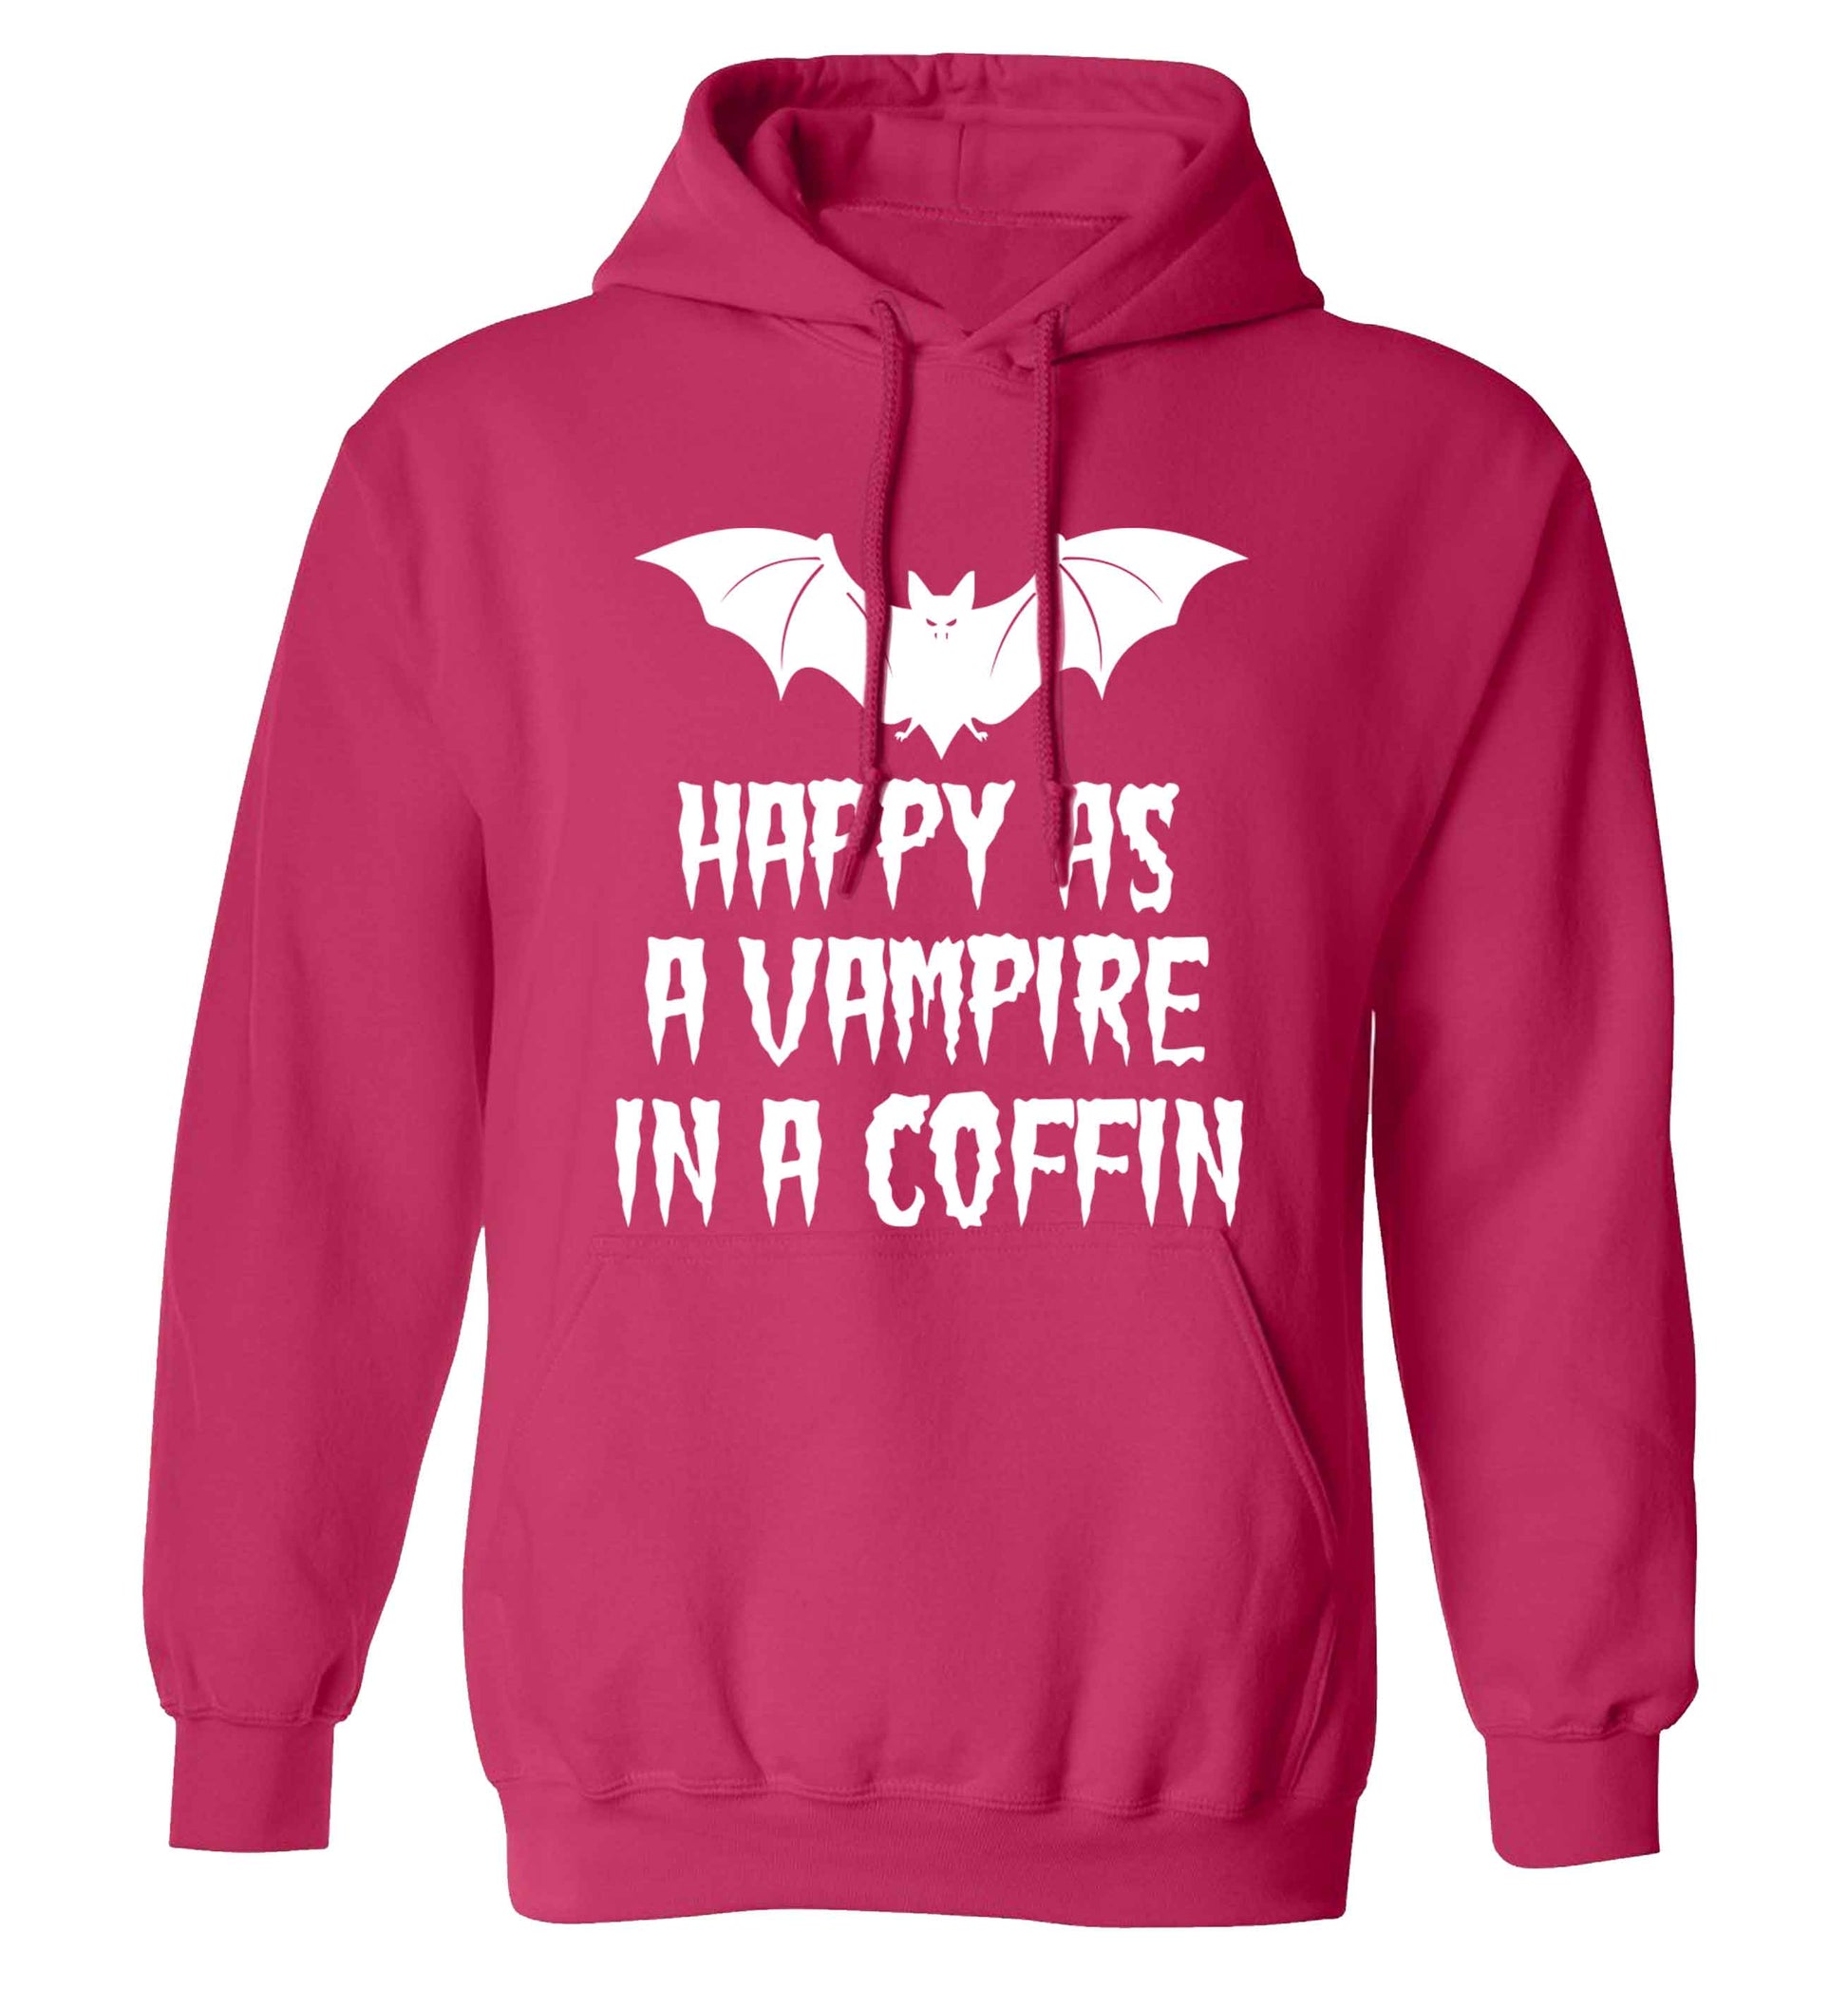 Happy as a vampire in a coffin adults unisex pink hoodie 2XL